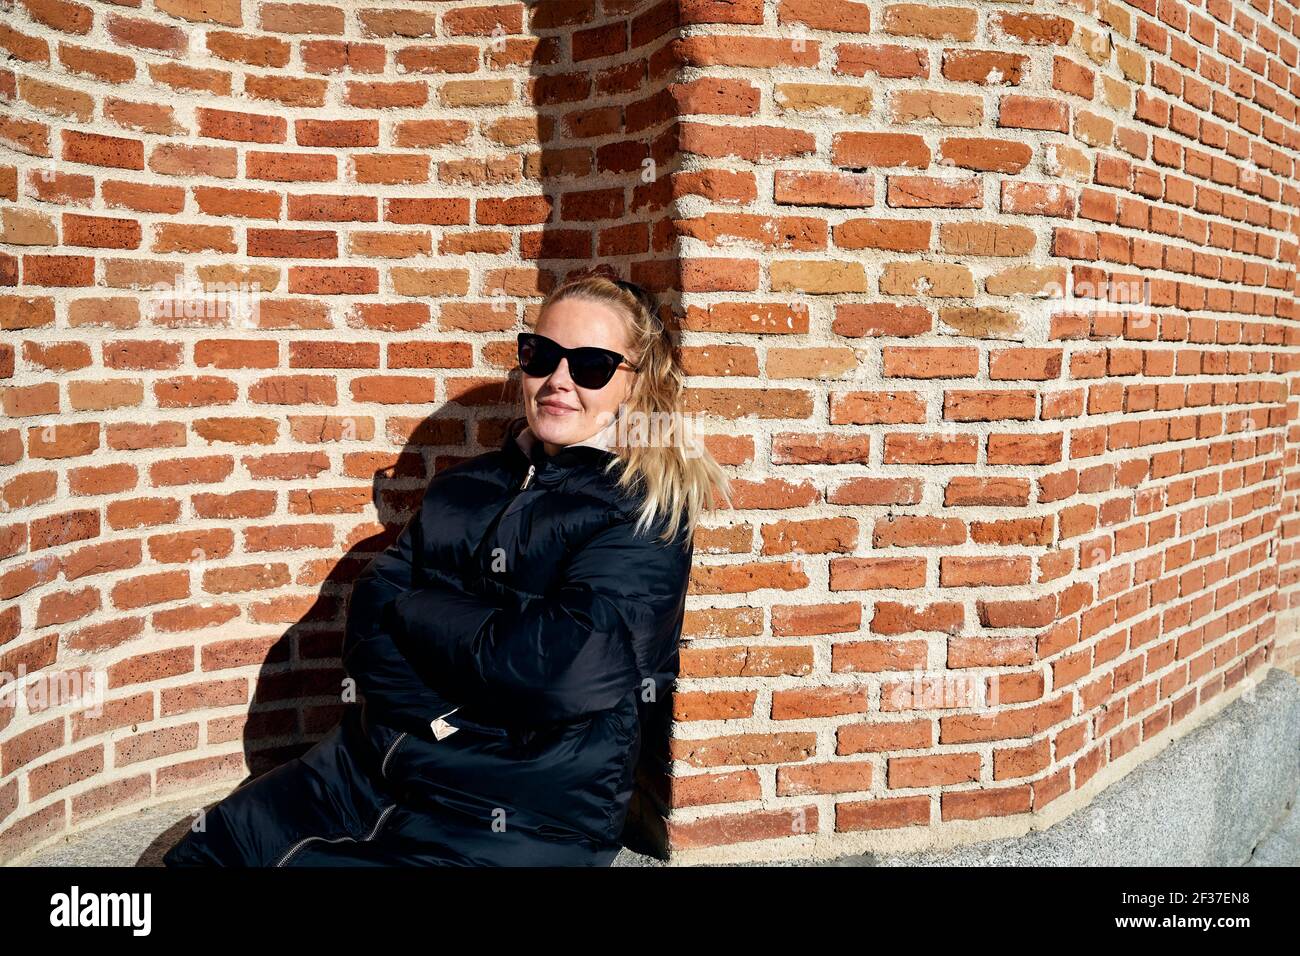 Woman in outerwear leaning on brick wall Stock Photo